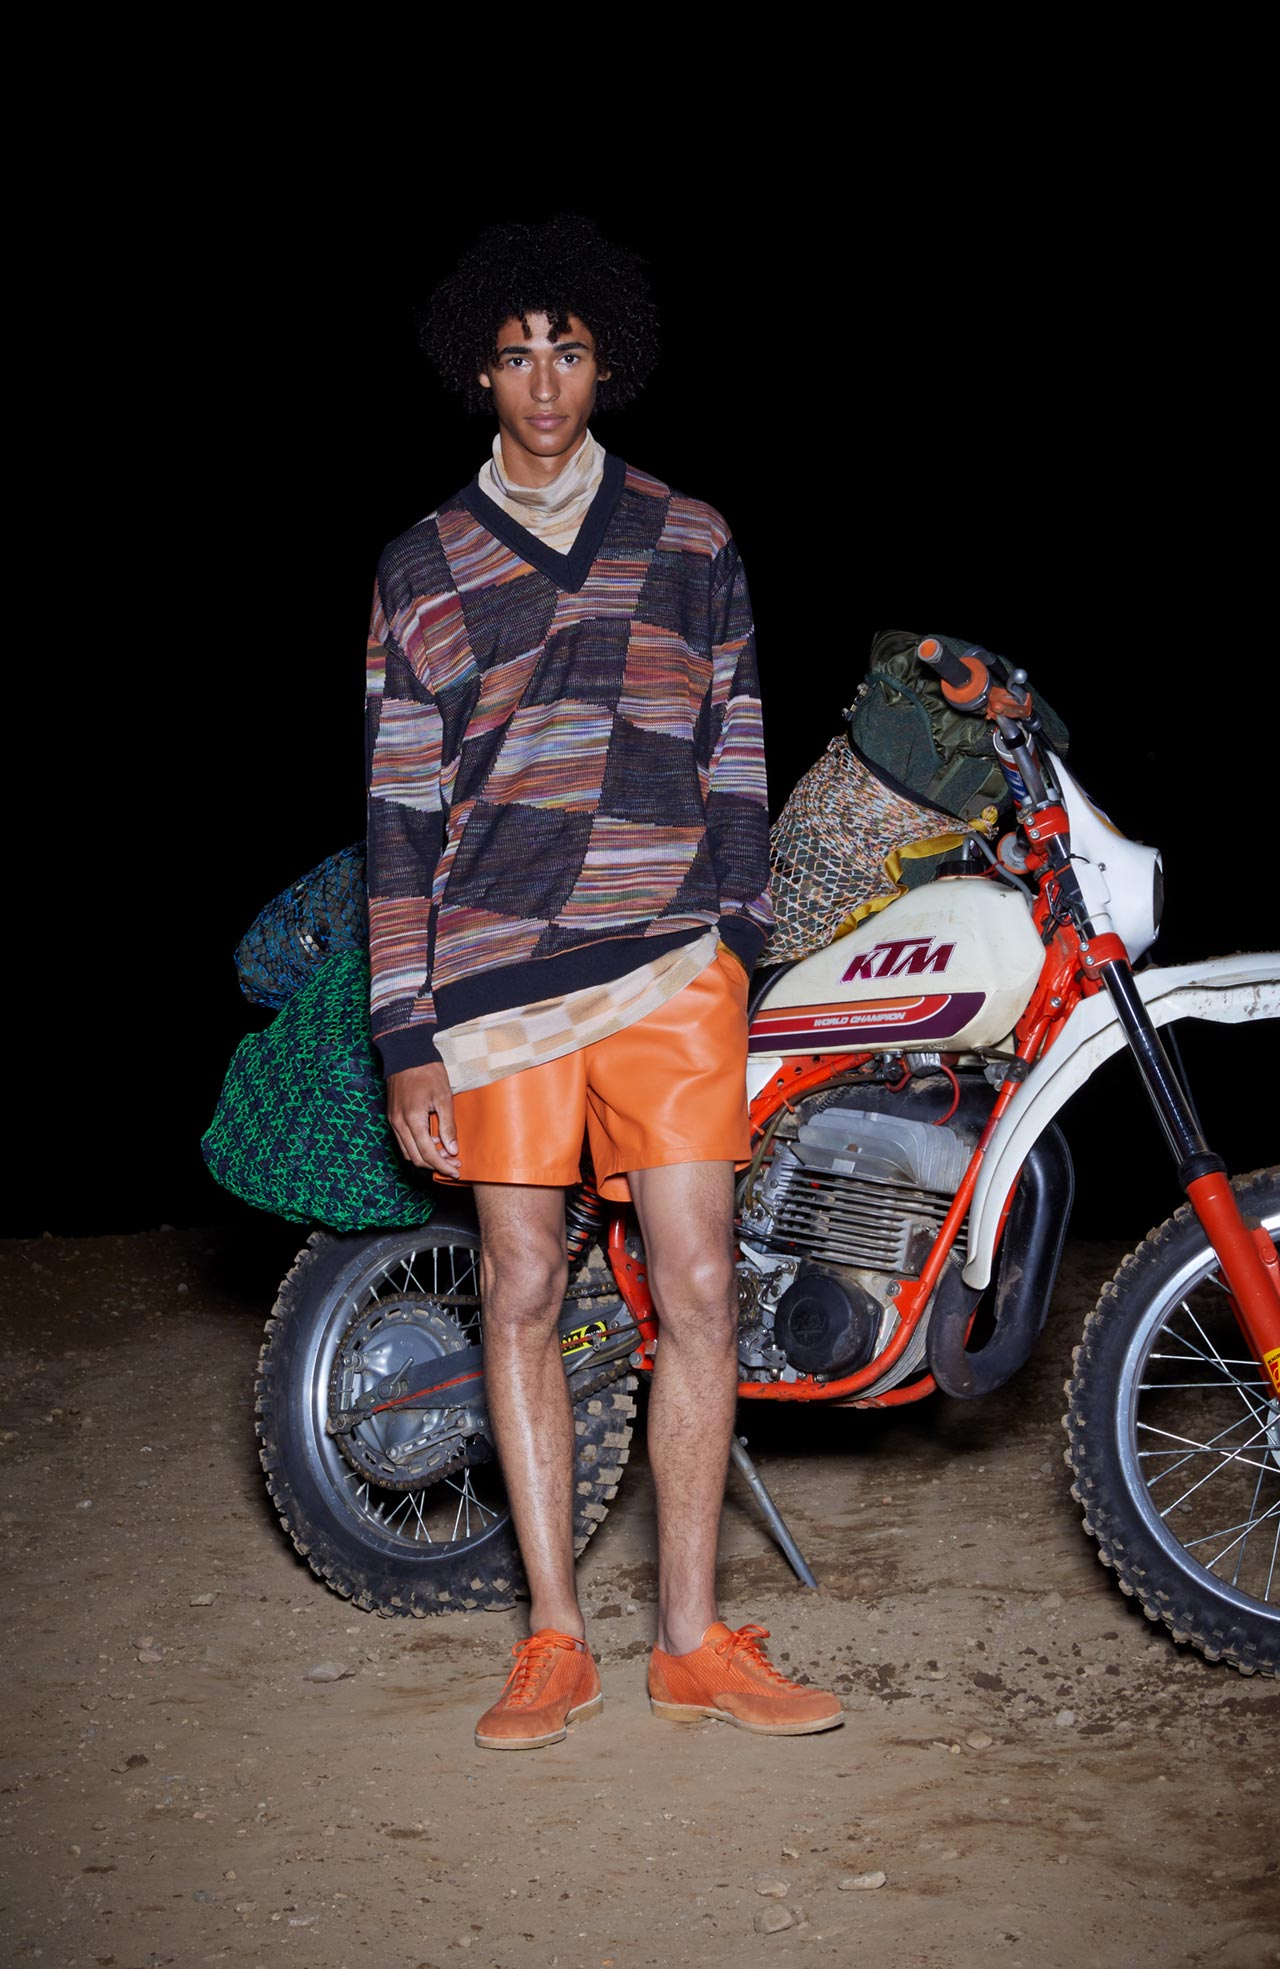 Angela Missoni was inspired by her family's love of motorcycles when creating the SS19 collection